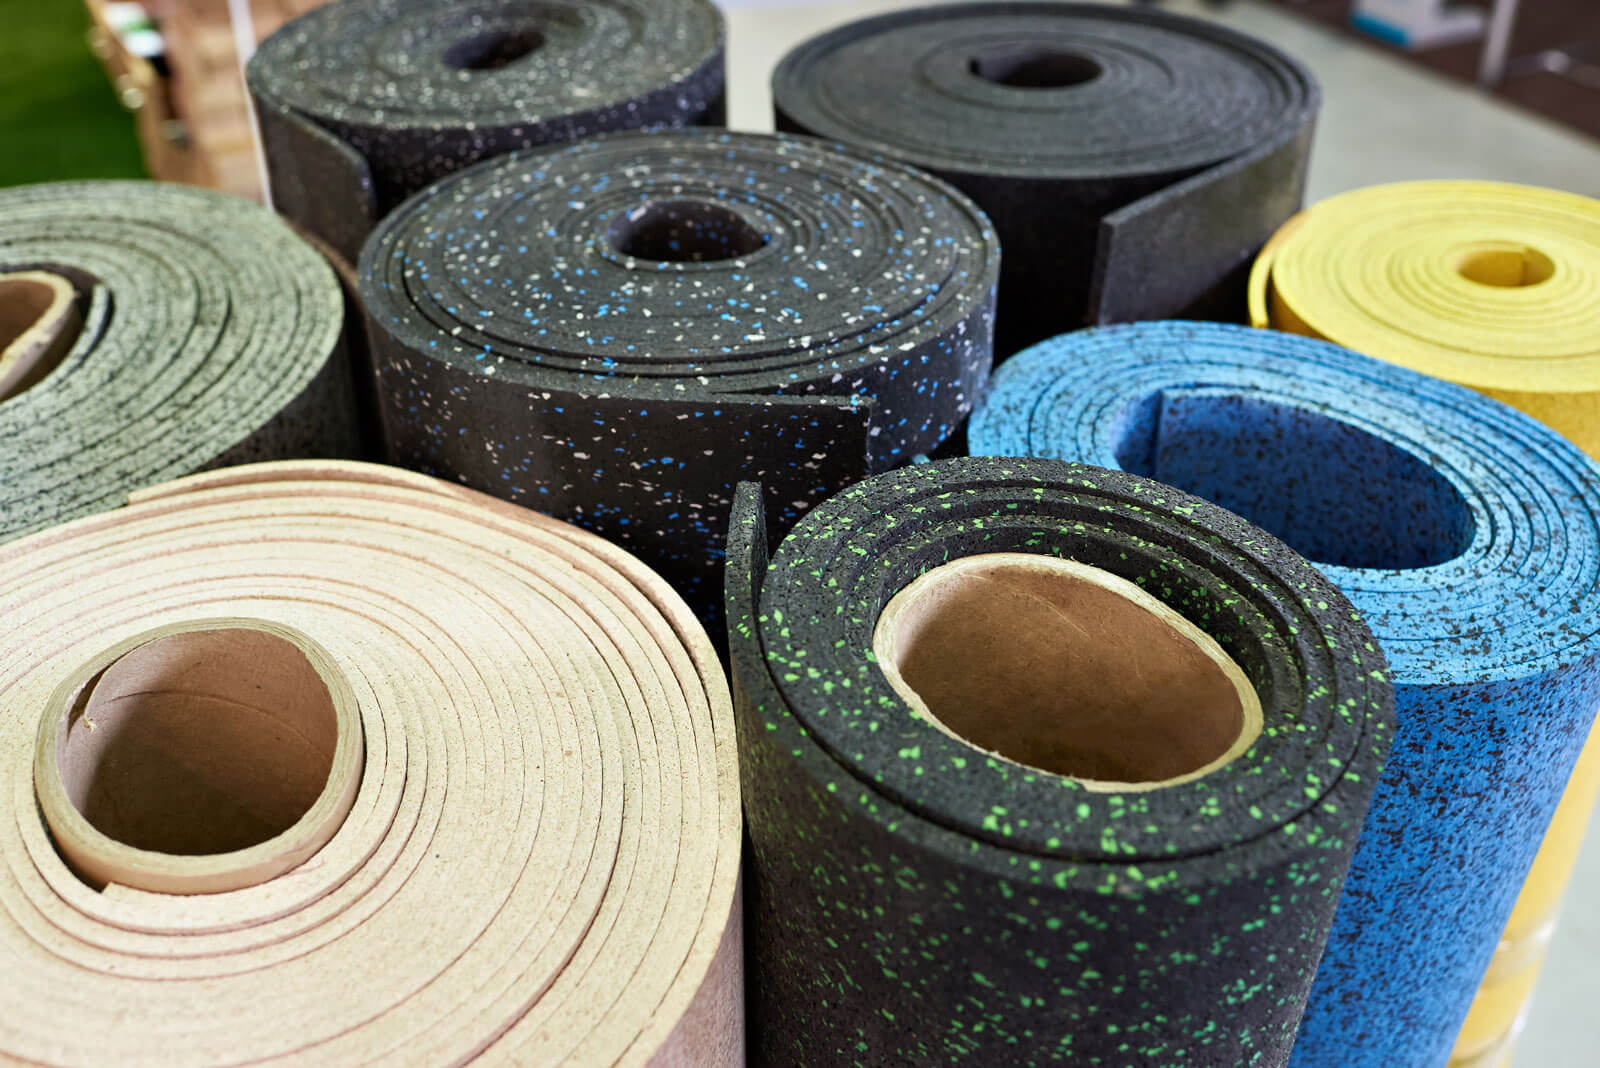 Rubber Rolls Armour Rubber